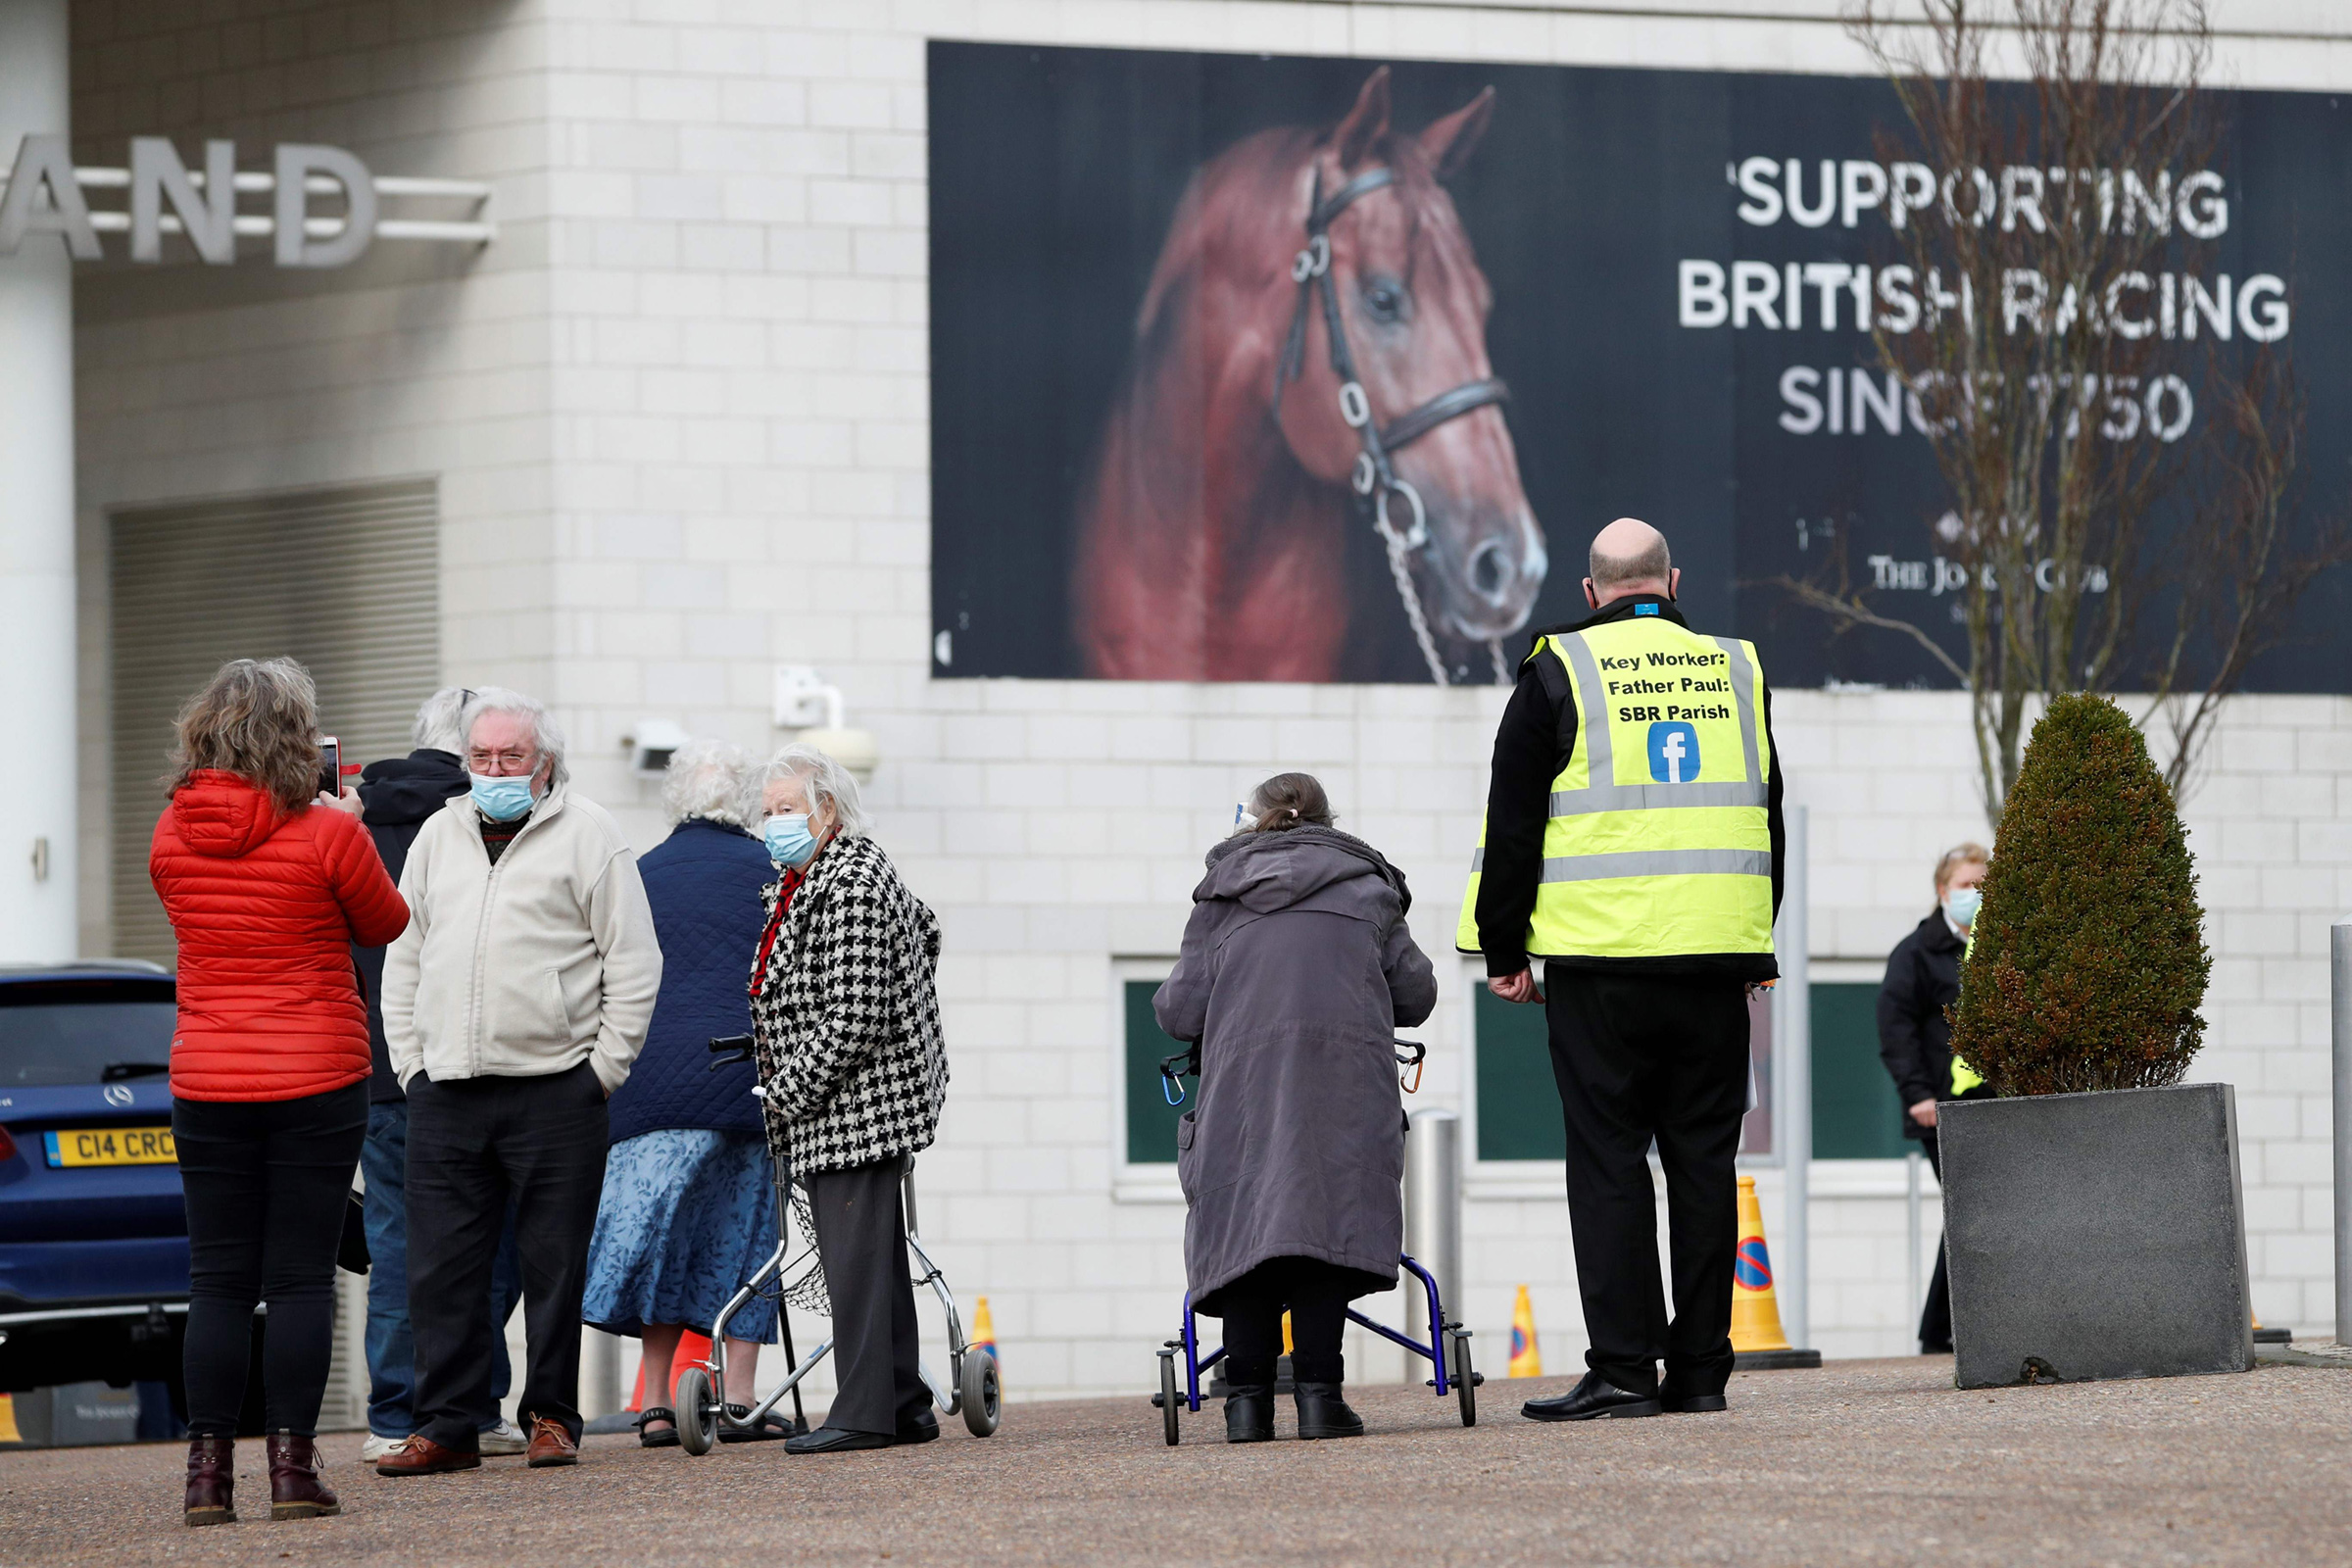 People arrive at Epsom Downs Racecourse as it opens as a COVID-19 vaccination center in Epsom, England, on Jan. 11, 2021. (Adrian Dennis—AFP/Getty Images)